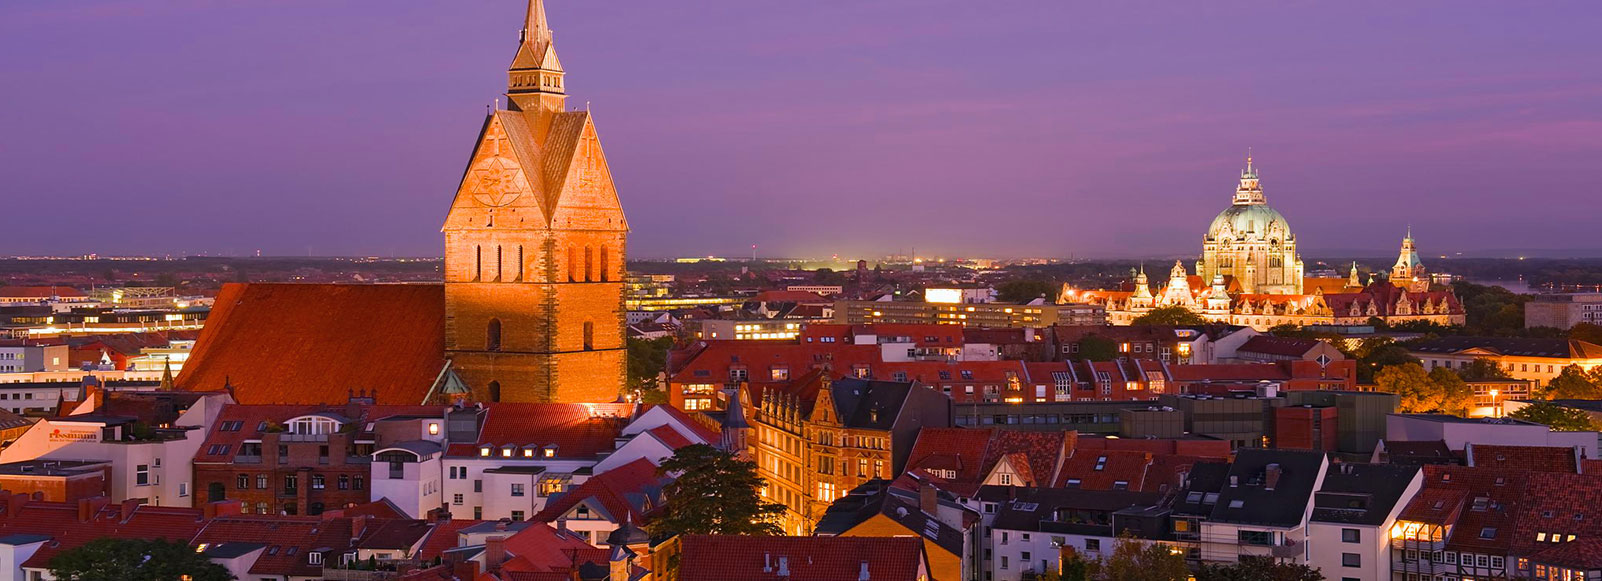 Transfer Offers in Hanover. Low Cost Transfers in  Hanover 